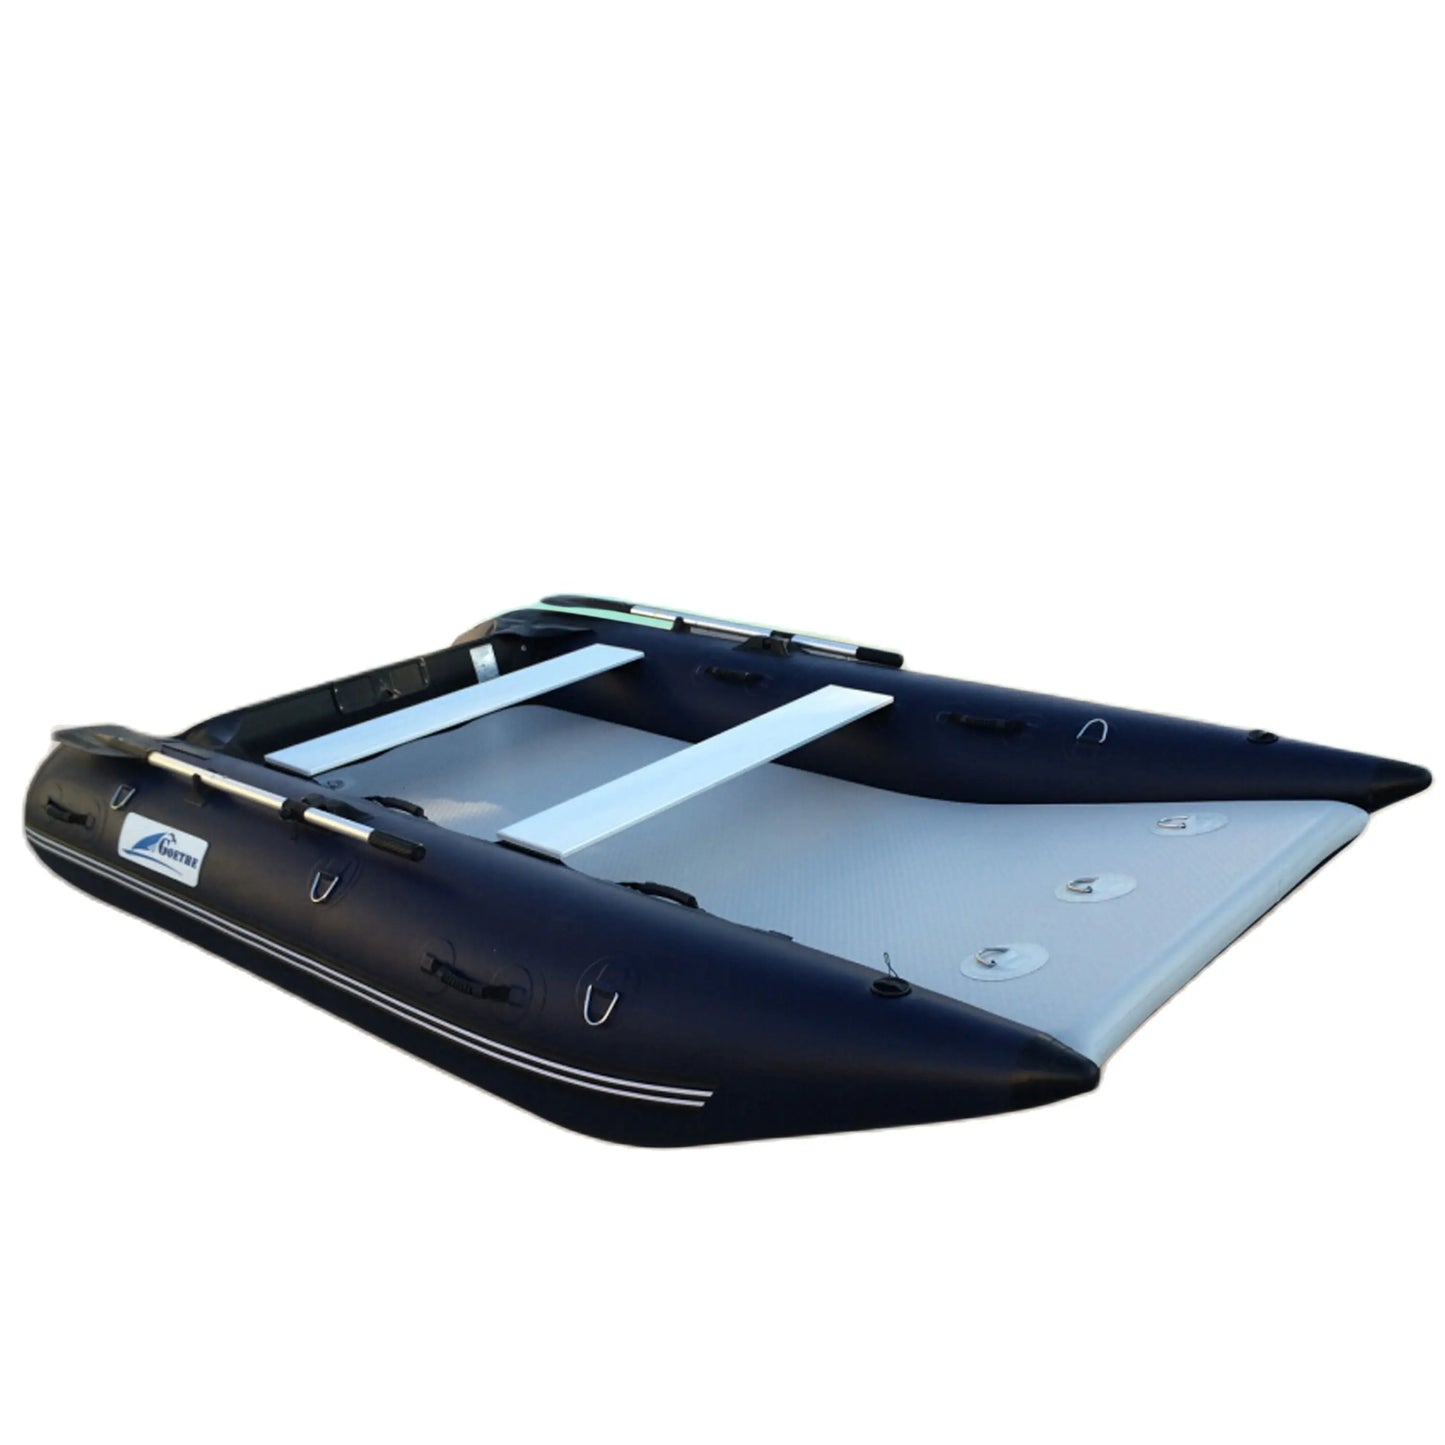 Goboat MC330 Inflatable Boat High Speed Catamaran PVC Water Sports Multi-colors Surfing Drifting Camping Fishing Equipment